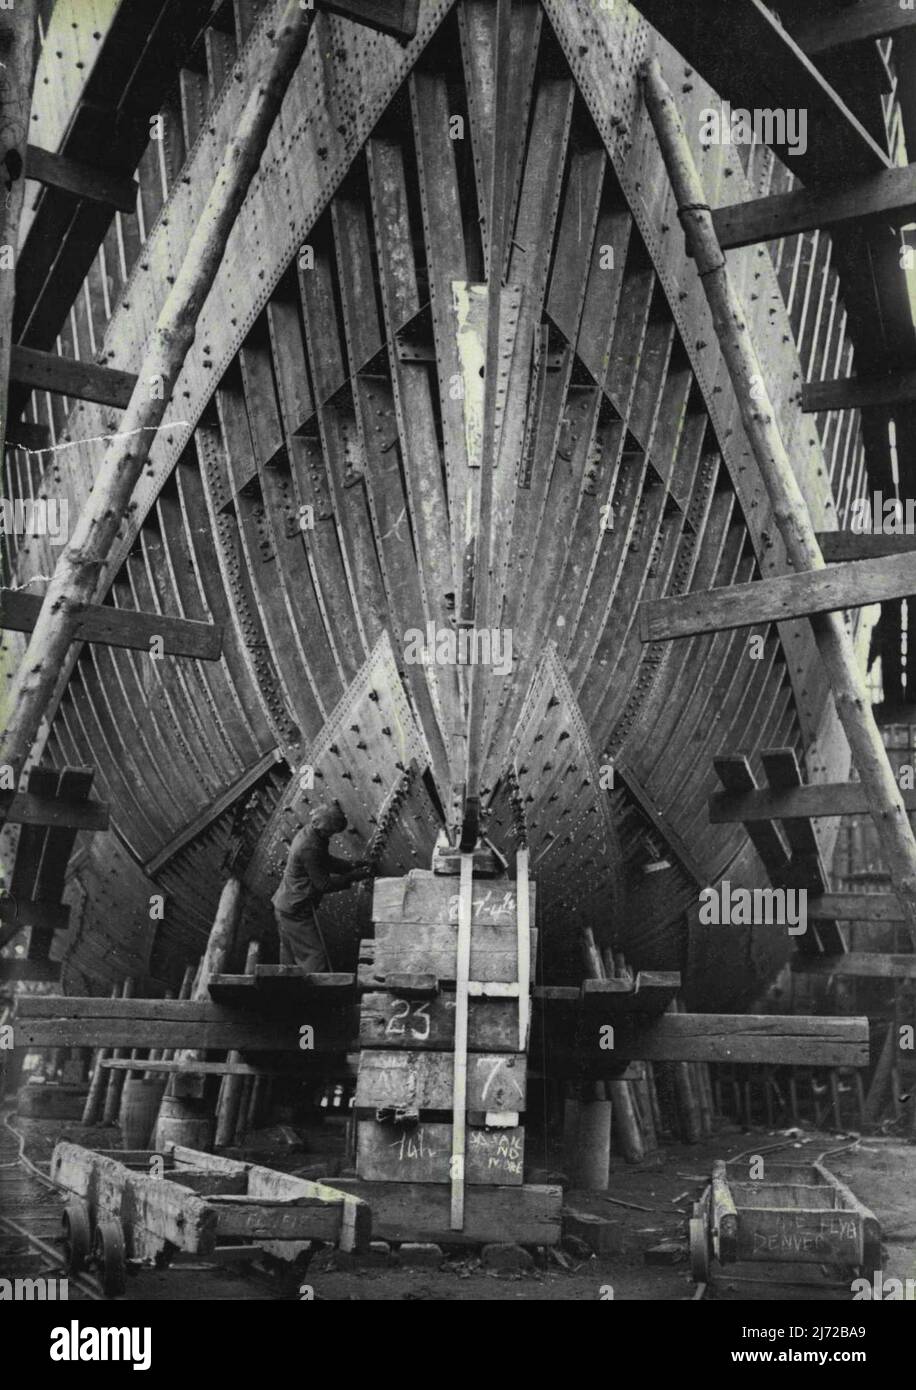 Tightening up the bolts on the bow of a large Cargo ship on the *****. Cargo Vessels are now bring built by a practical approach to Mass production methods. Ship yards are building the types which in each case4 they are most experience in and equipped. May 28, 1940. (Photo by Sport & General Press Agency Limited). Stock Photo